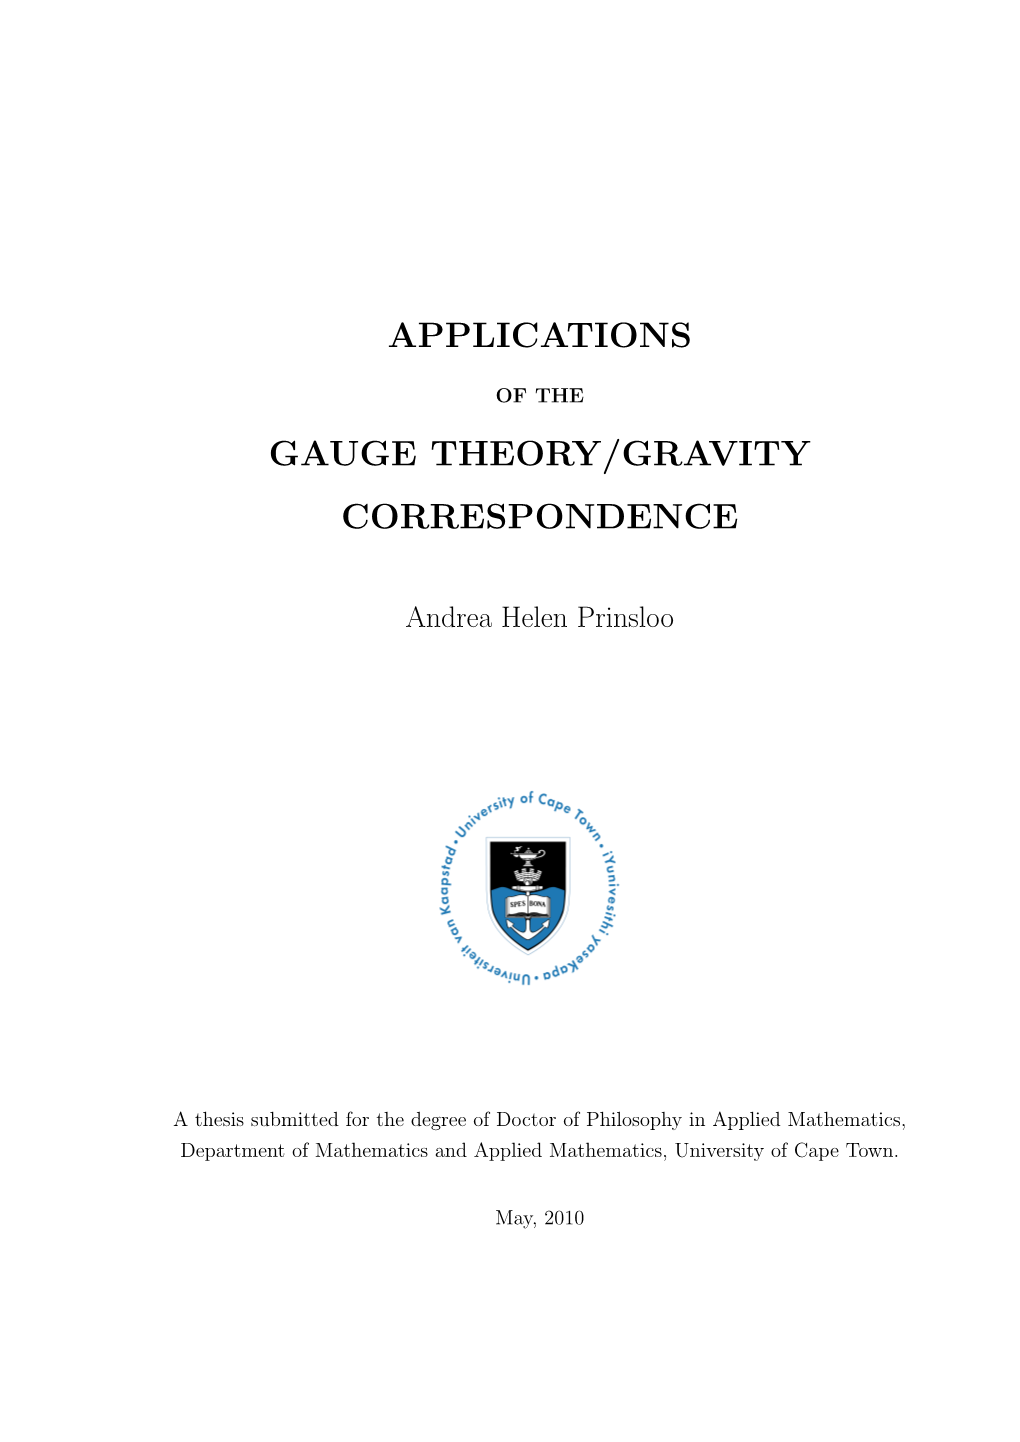 Applications Gauge Theory/Gravity